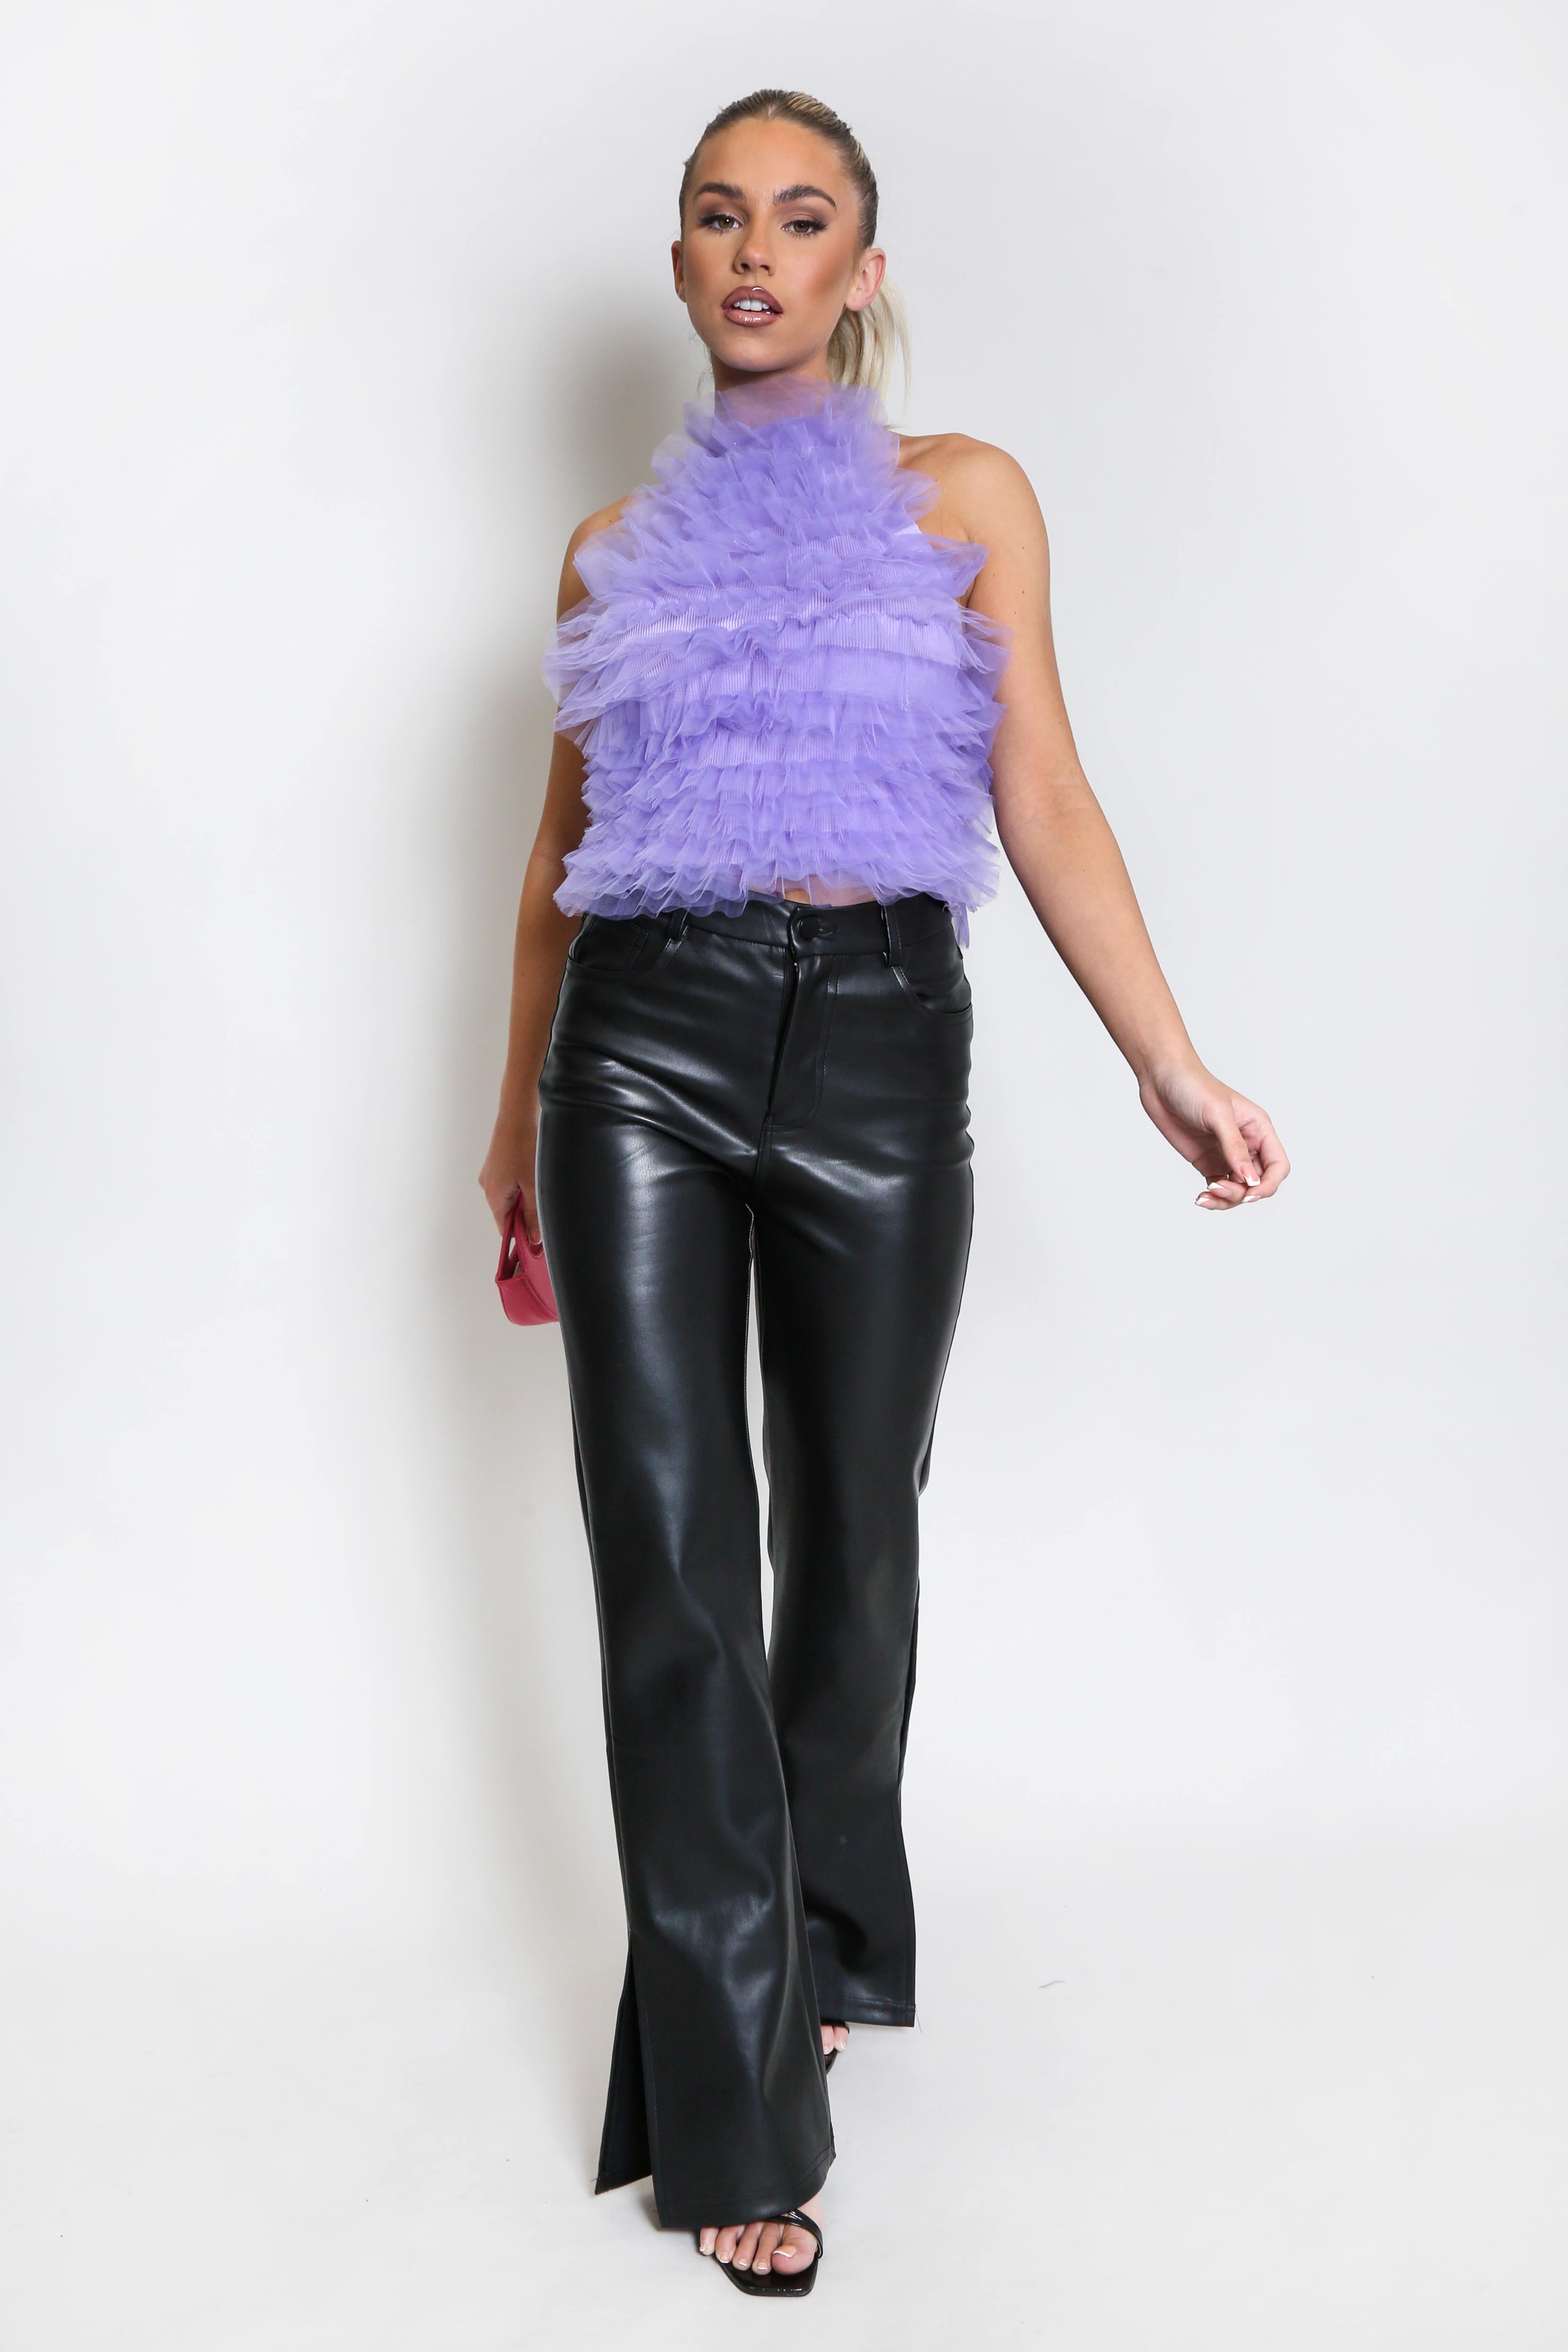 Lilac Tulle Halter Neck Ruffle Top